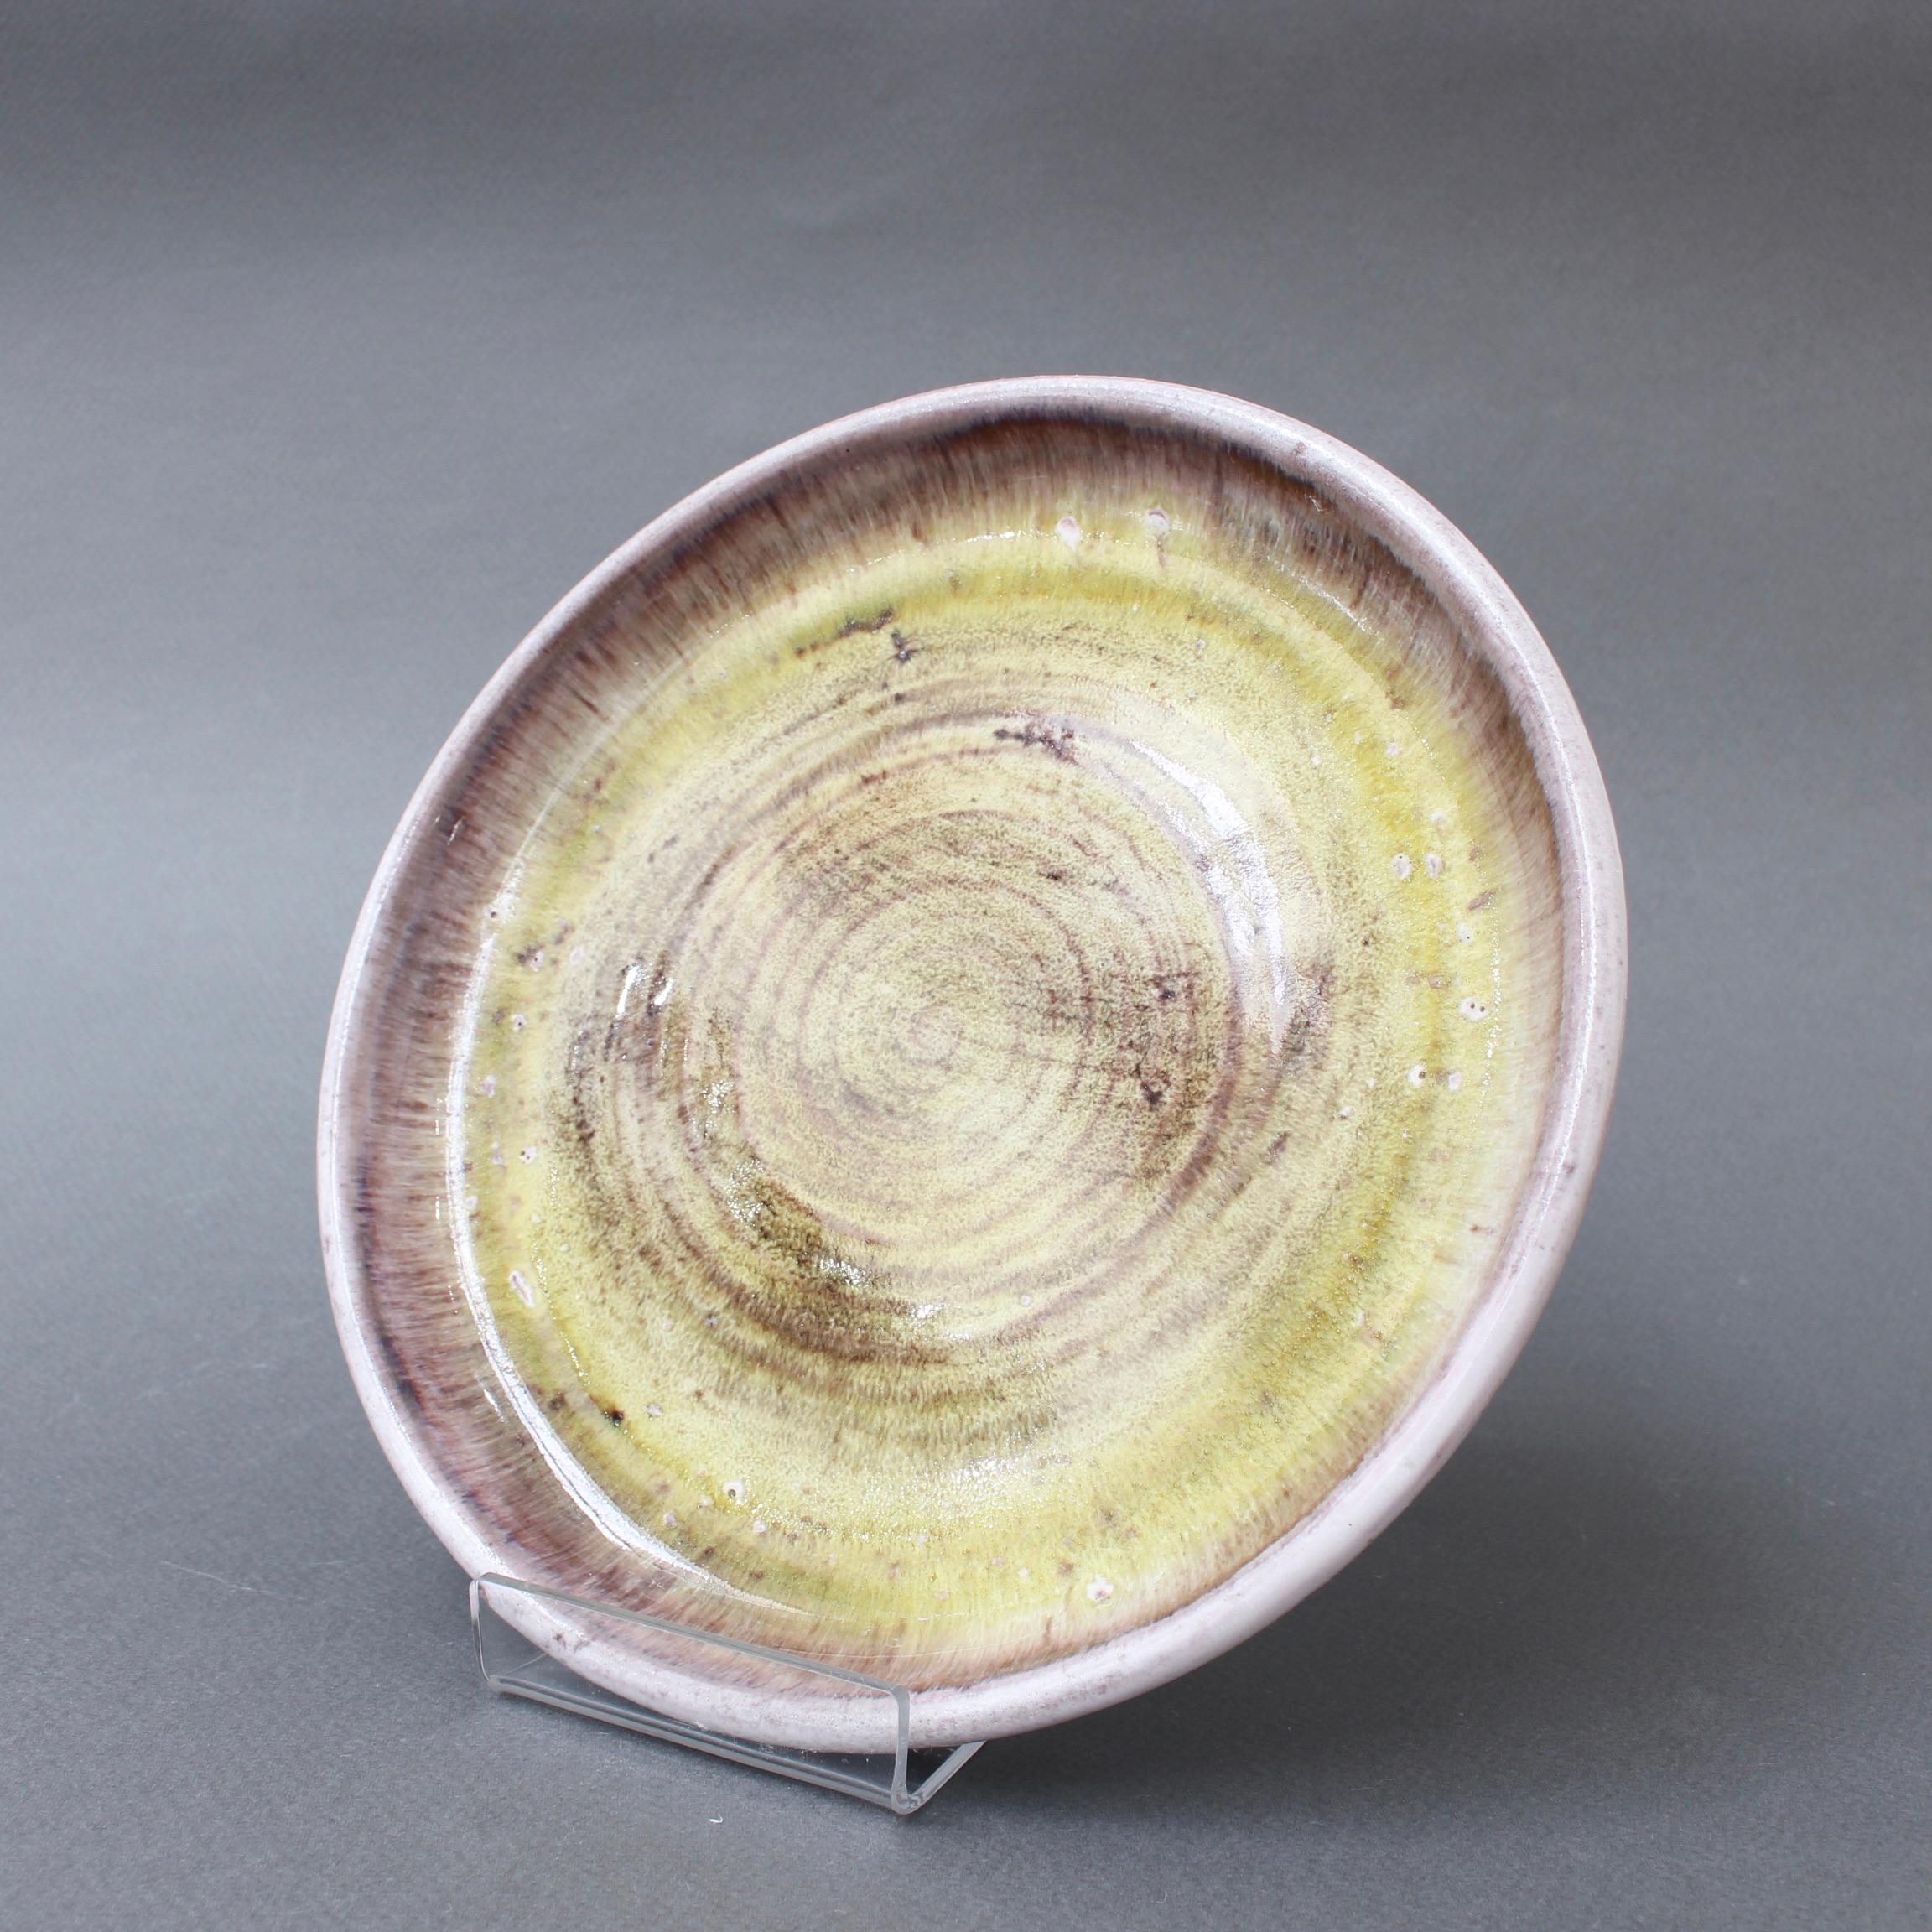 Decorative ceramic plate by the Cloutier brothers (circa 1970s). Exquisite design with concentric circle motif. The base color is muted magenta with a centre of bright yellow imparting the plate with a sunflower feel. This is an authentic,